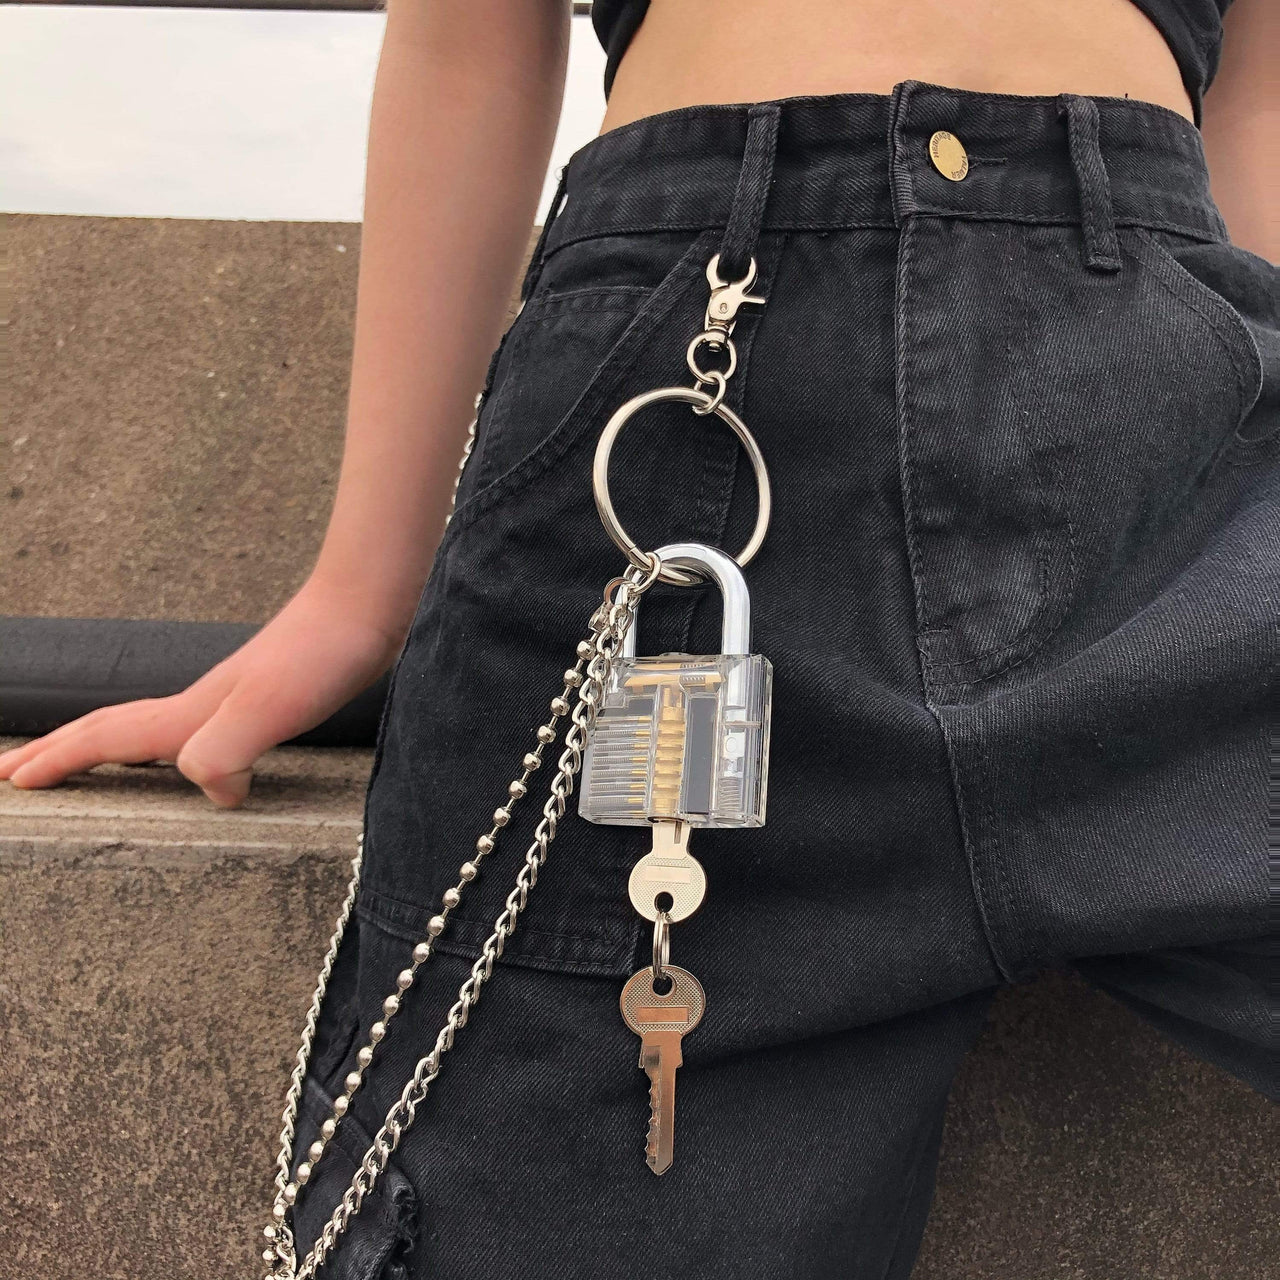 Stainless Steel Punk Style Lock With Key Pendant Trouser Chain